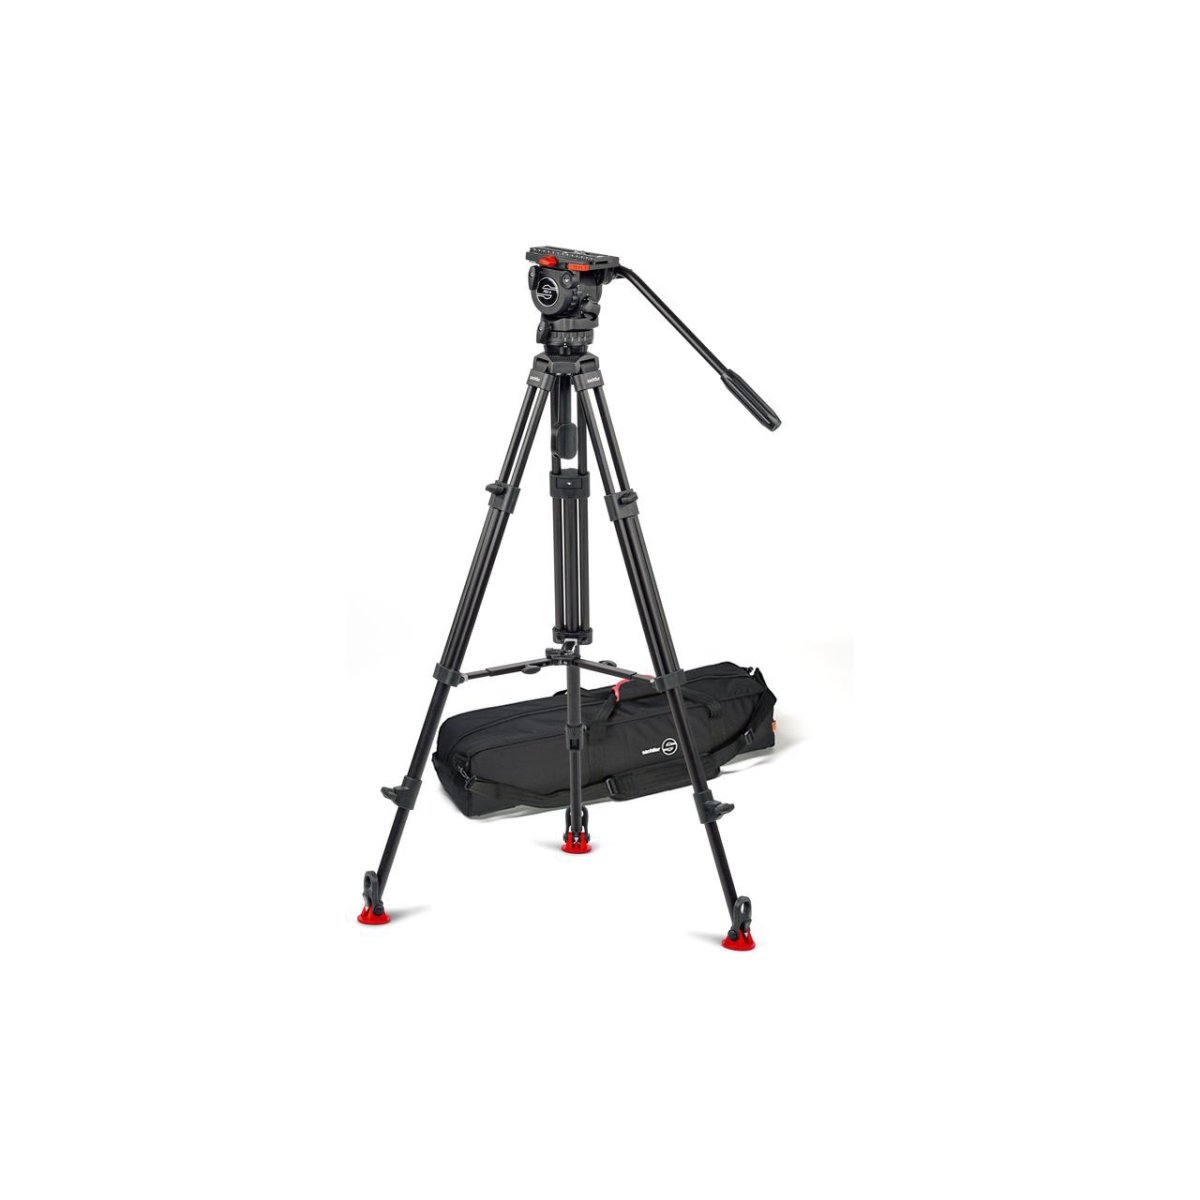 Picture of Sachtler SACH-0473CM 75 mm System Package - FSB6 MK II Fluid Head with Tripod 75-2 CF with Mid-level Spreader & Padded Bag - Black